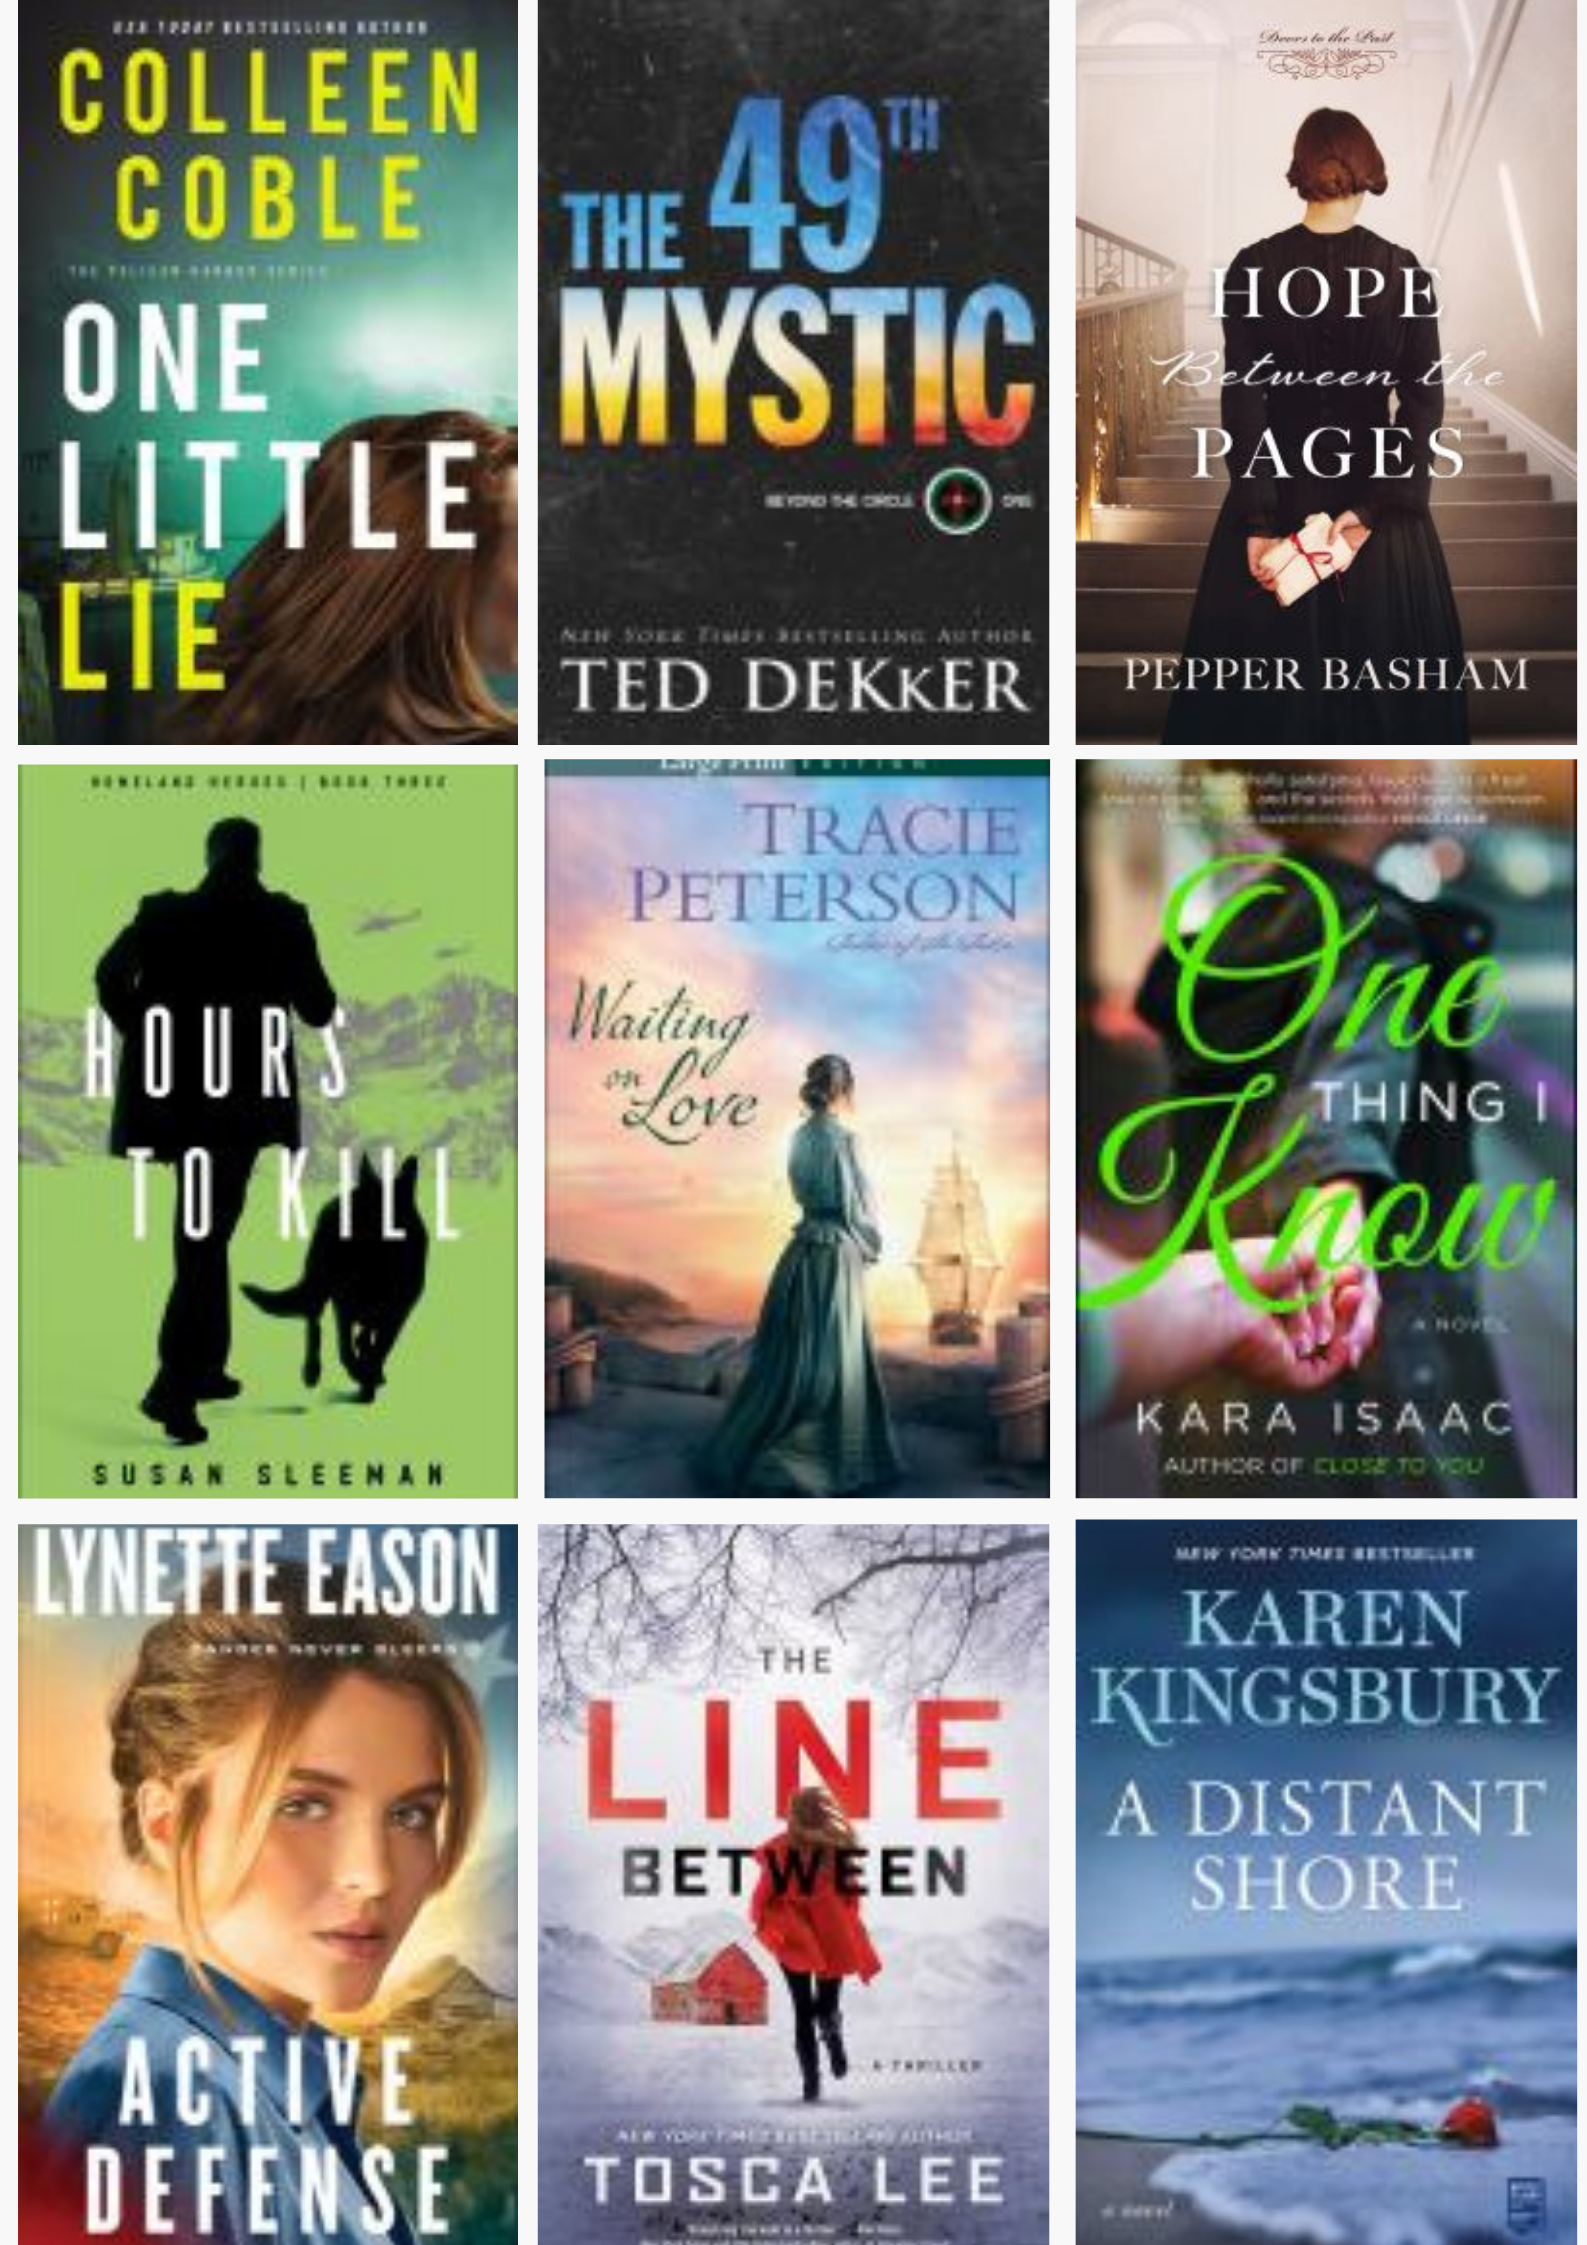 Book Cover Images - Christian Fiction